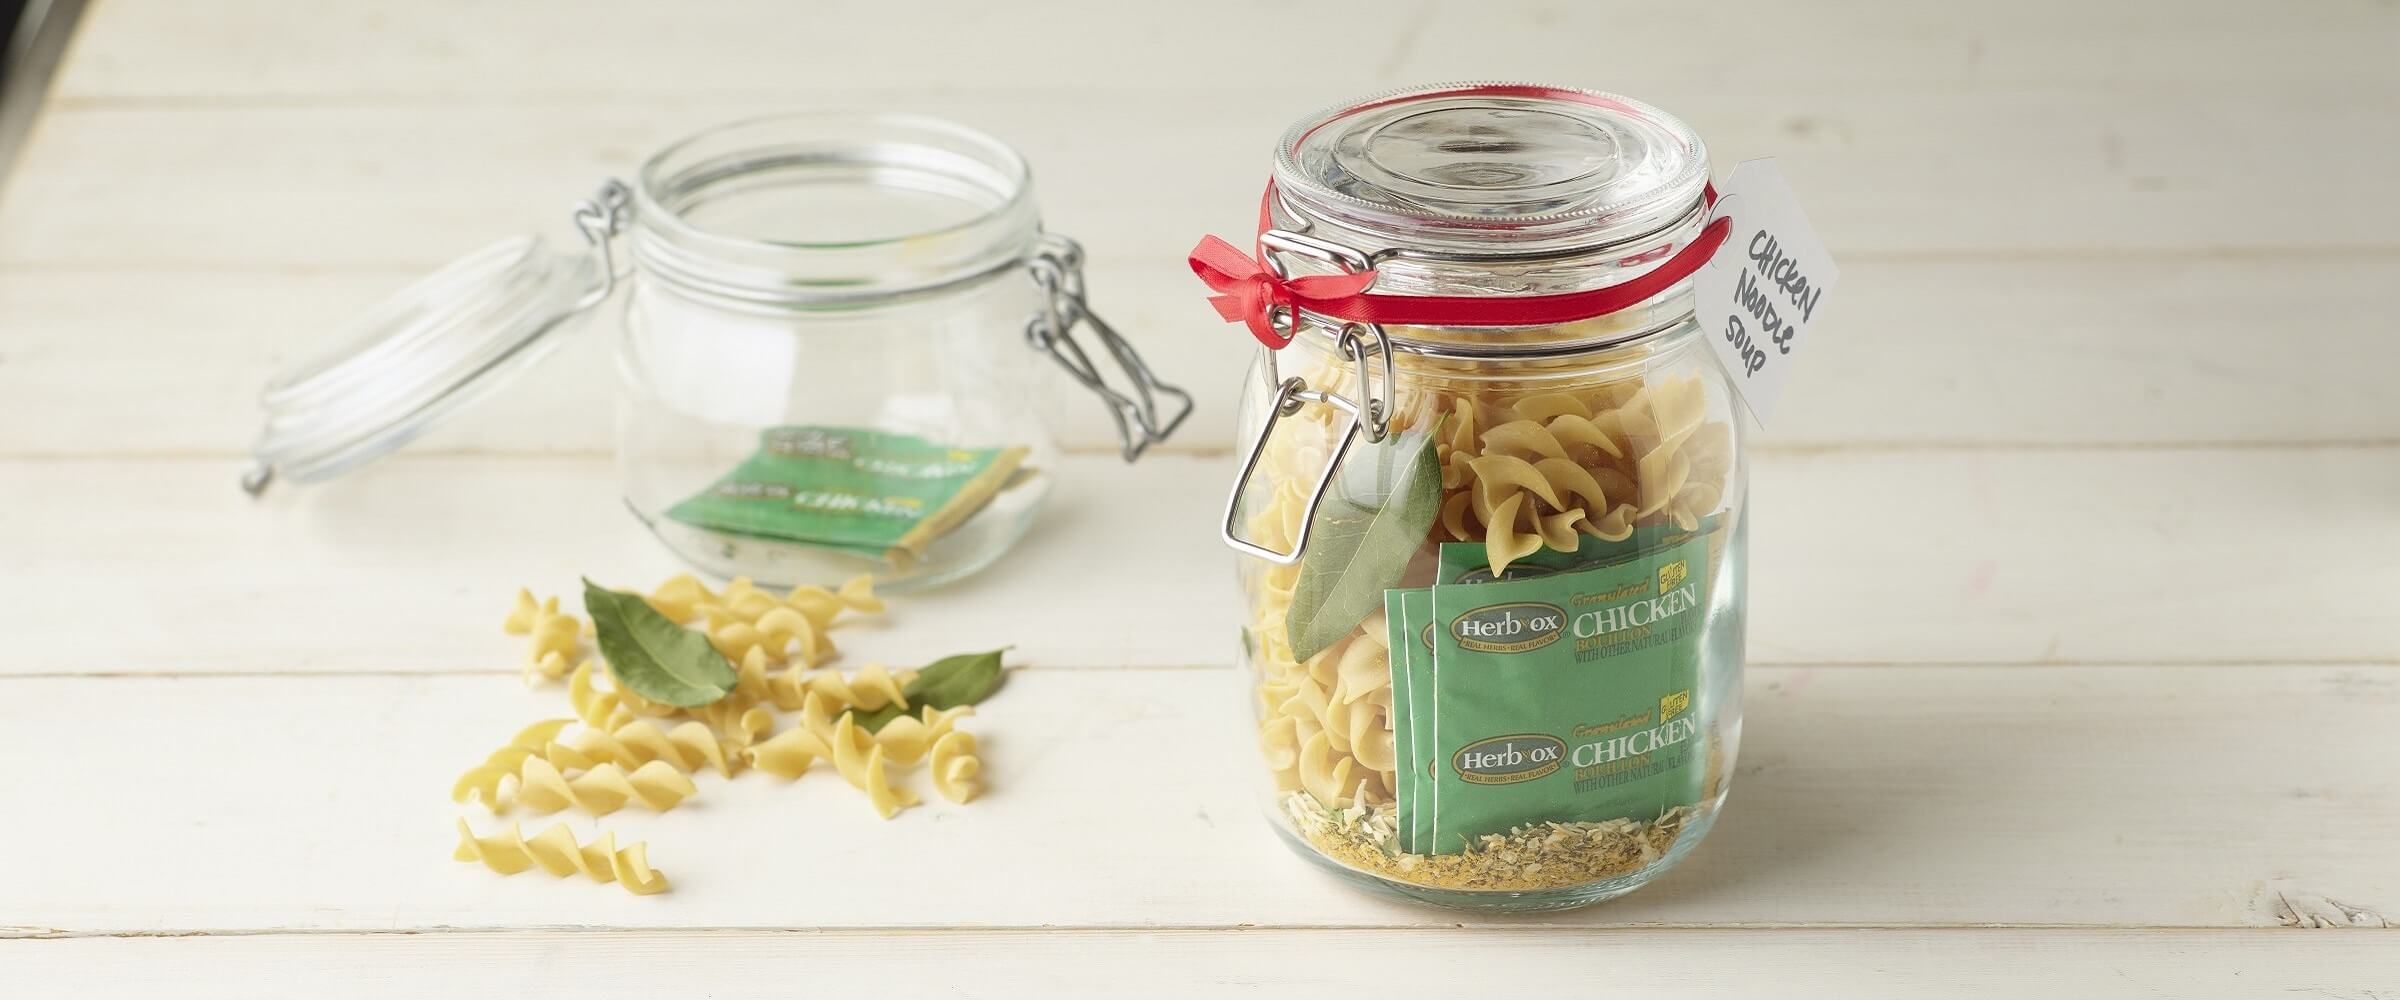 Clear jar with Herb ox packet, spices and dry noodles to make soup